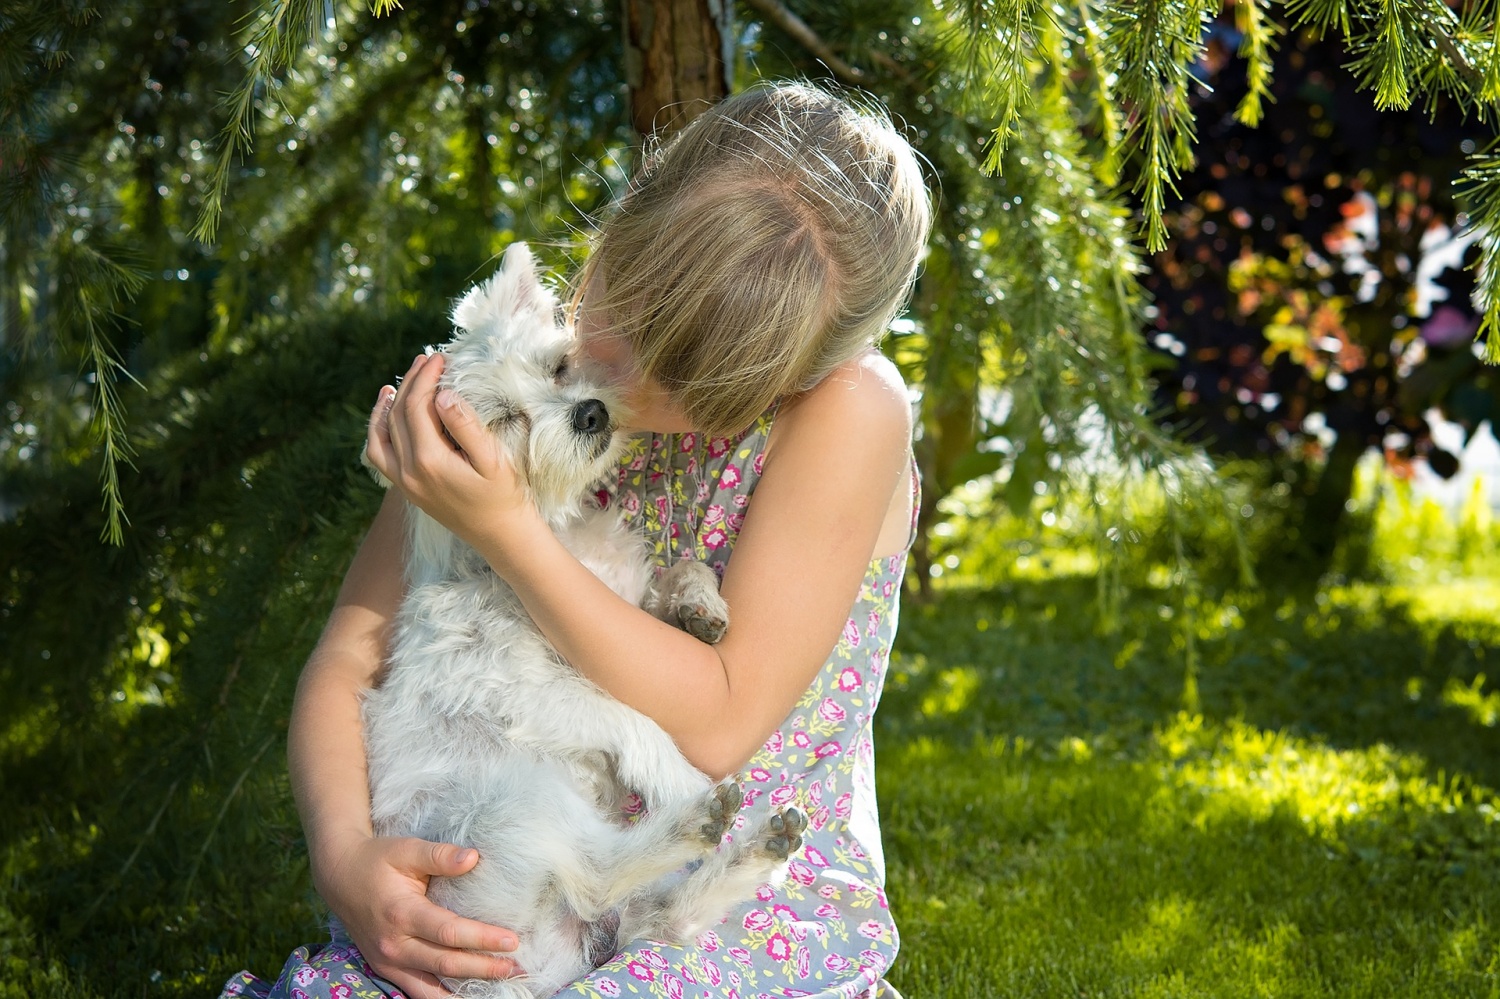 Pets and Their Healing Powers